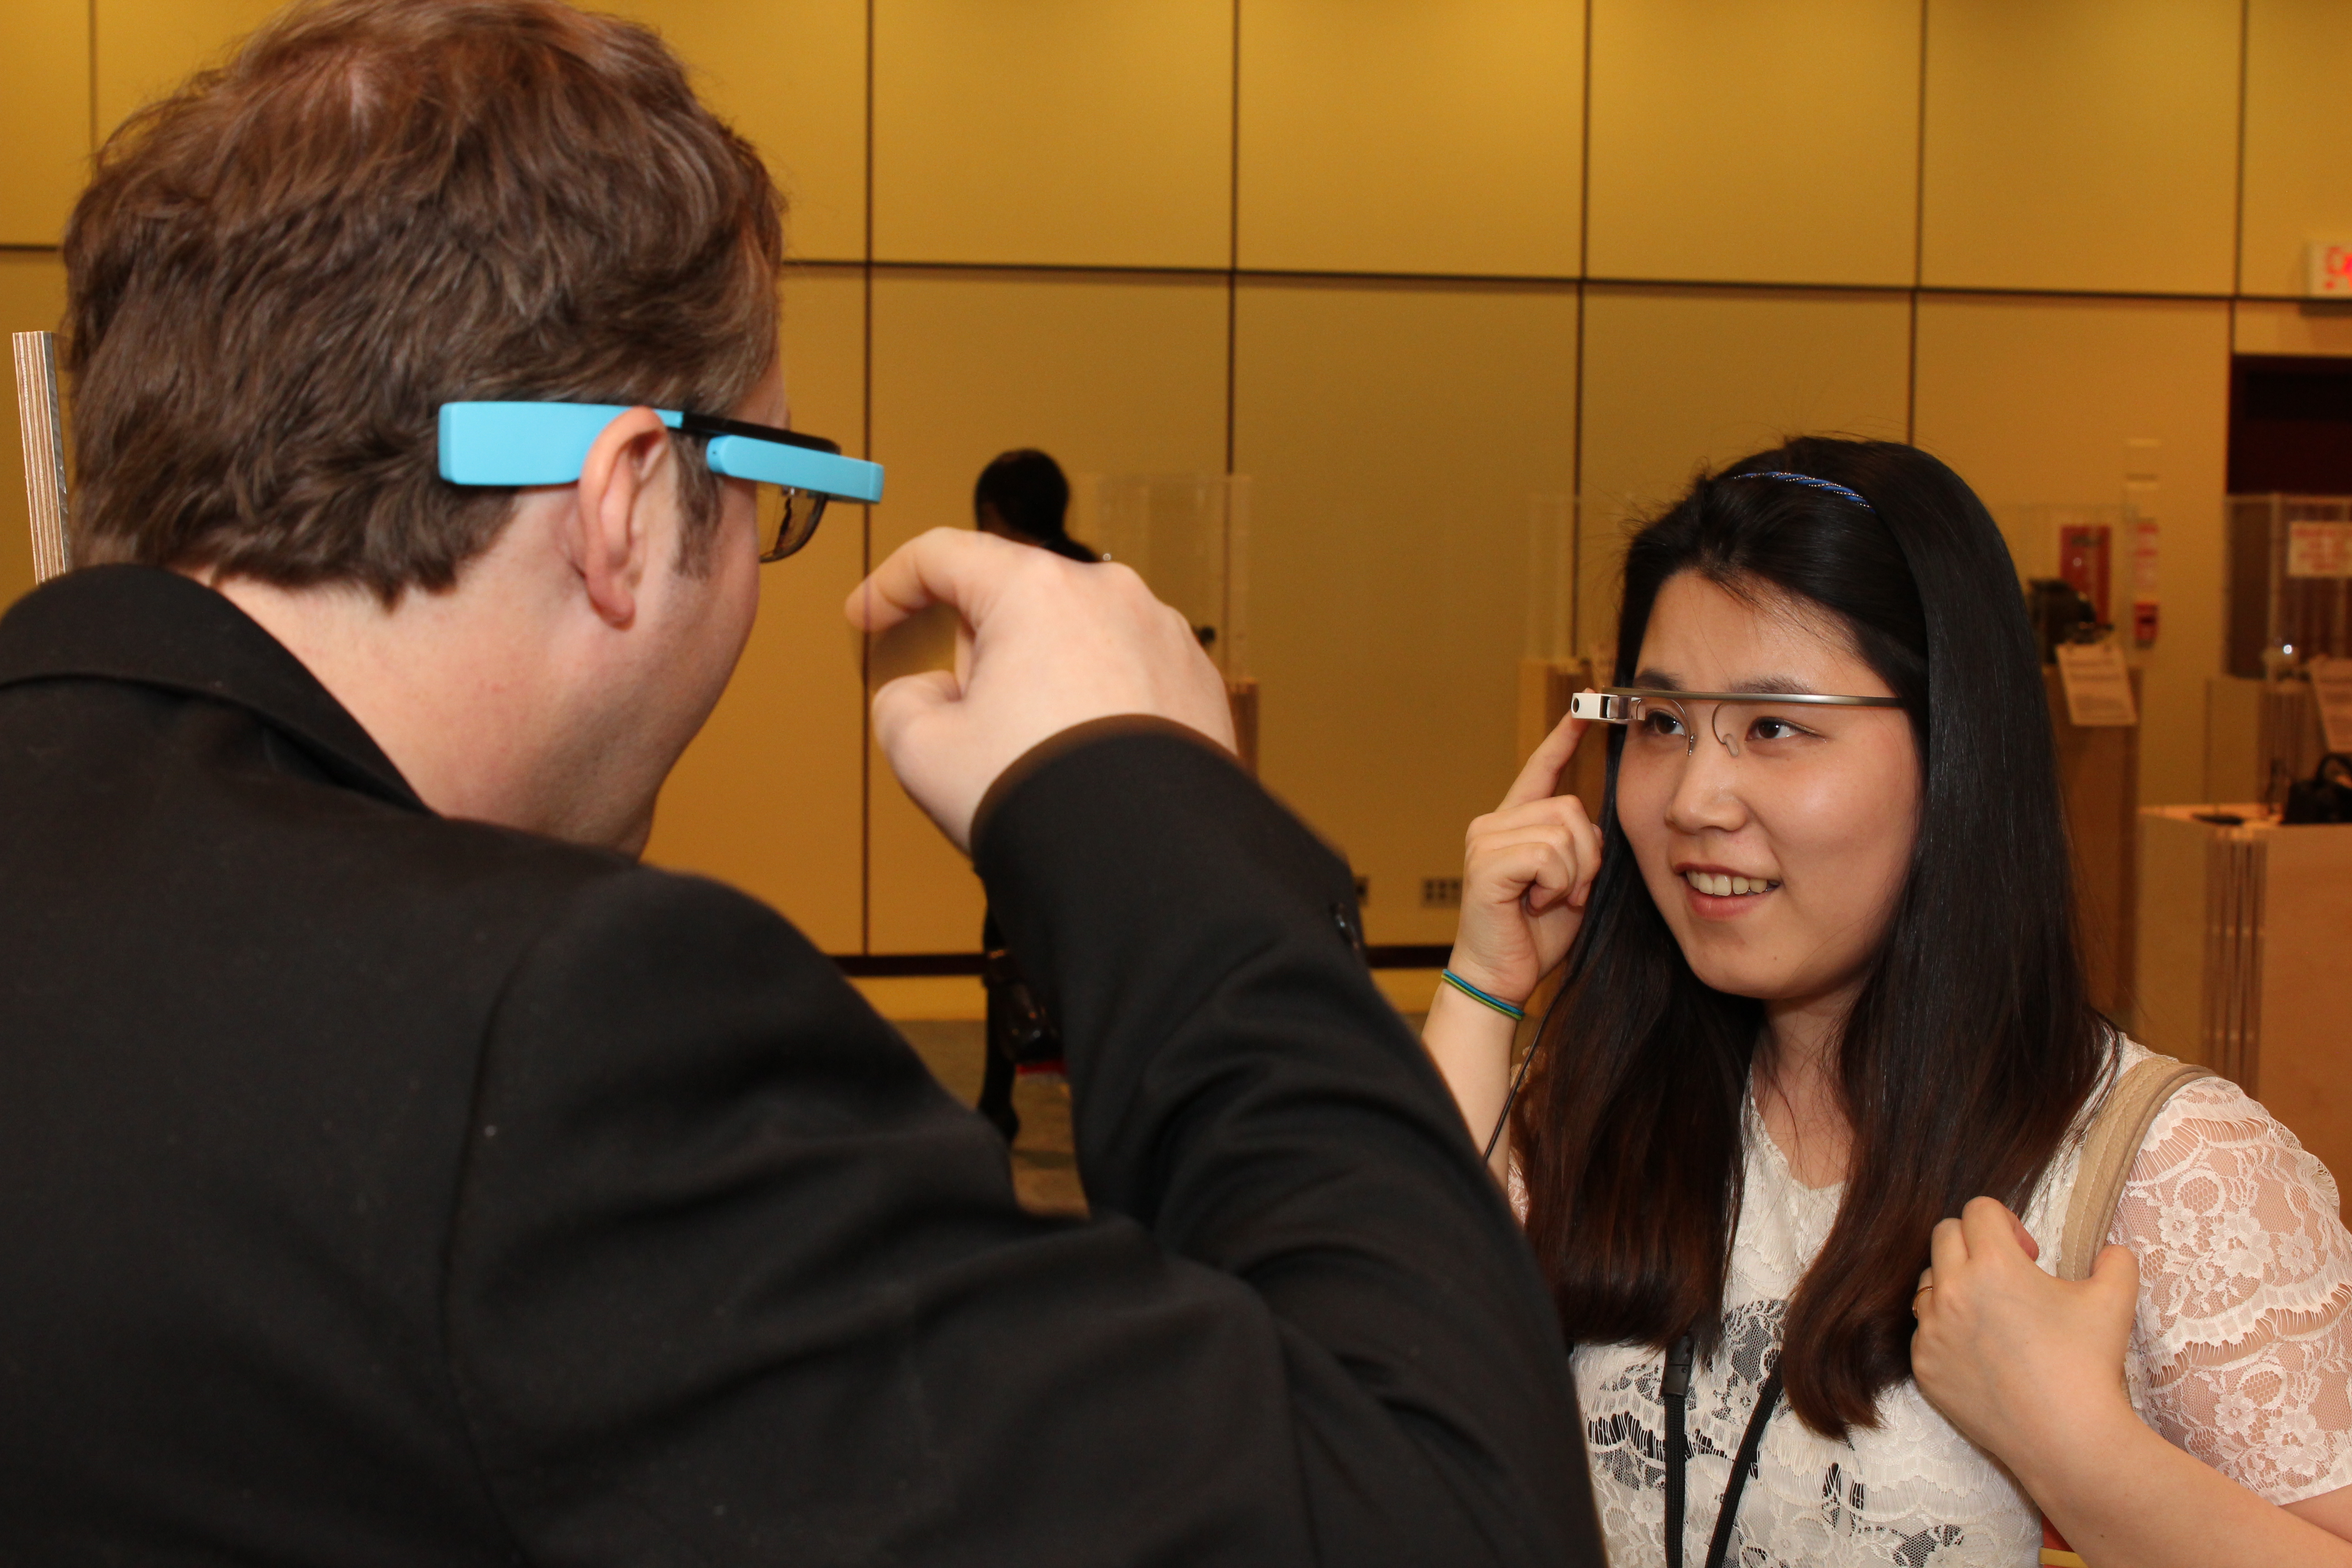 Professor Thad Starner demonstrates Google Glass. Starner is a technical lead on the Google project.